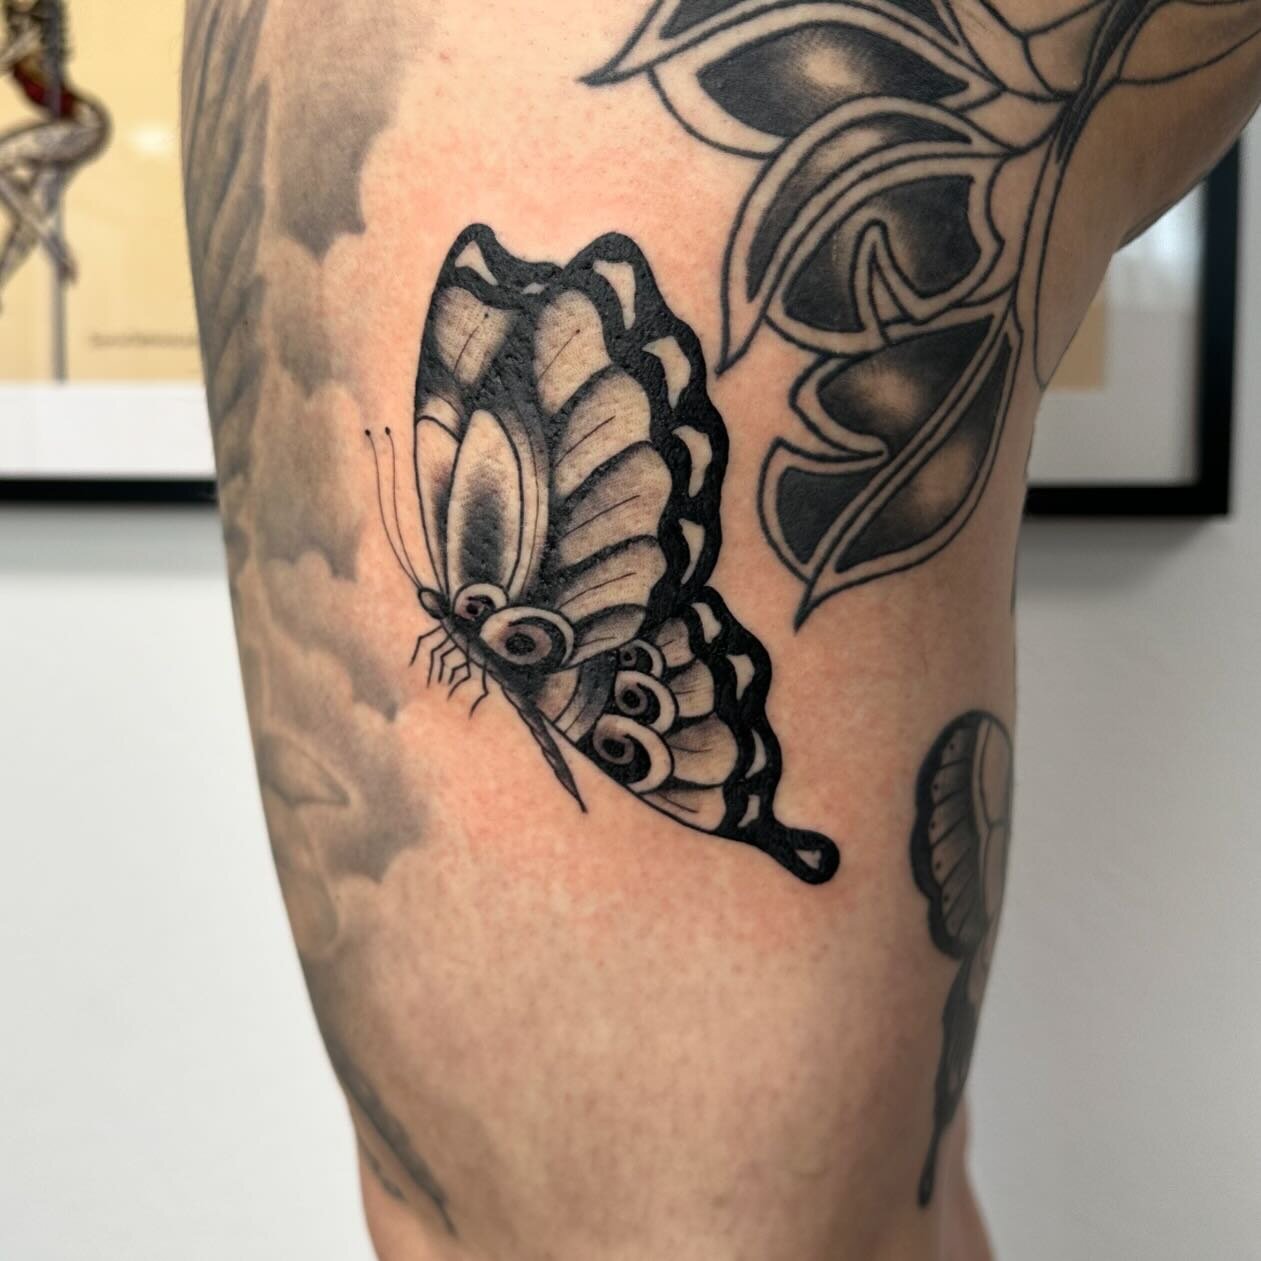 ❤️BUTTERFLY❤️
From my flash

Been doing a lot of Butterflies lately. Not complaining, just telling you I love it and keep em coming. Thanks Janina for the Trust❤️❤️
With Love Chelly❤️
My books are open!!
Dm me if your interested 
Find me @noble_tatto